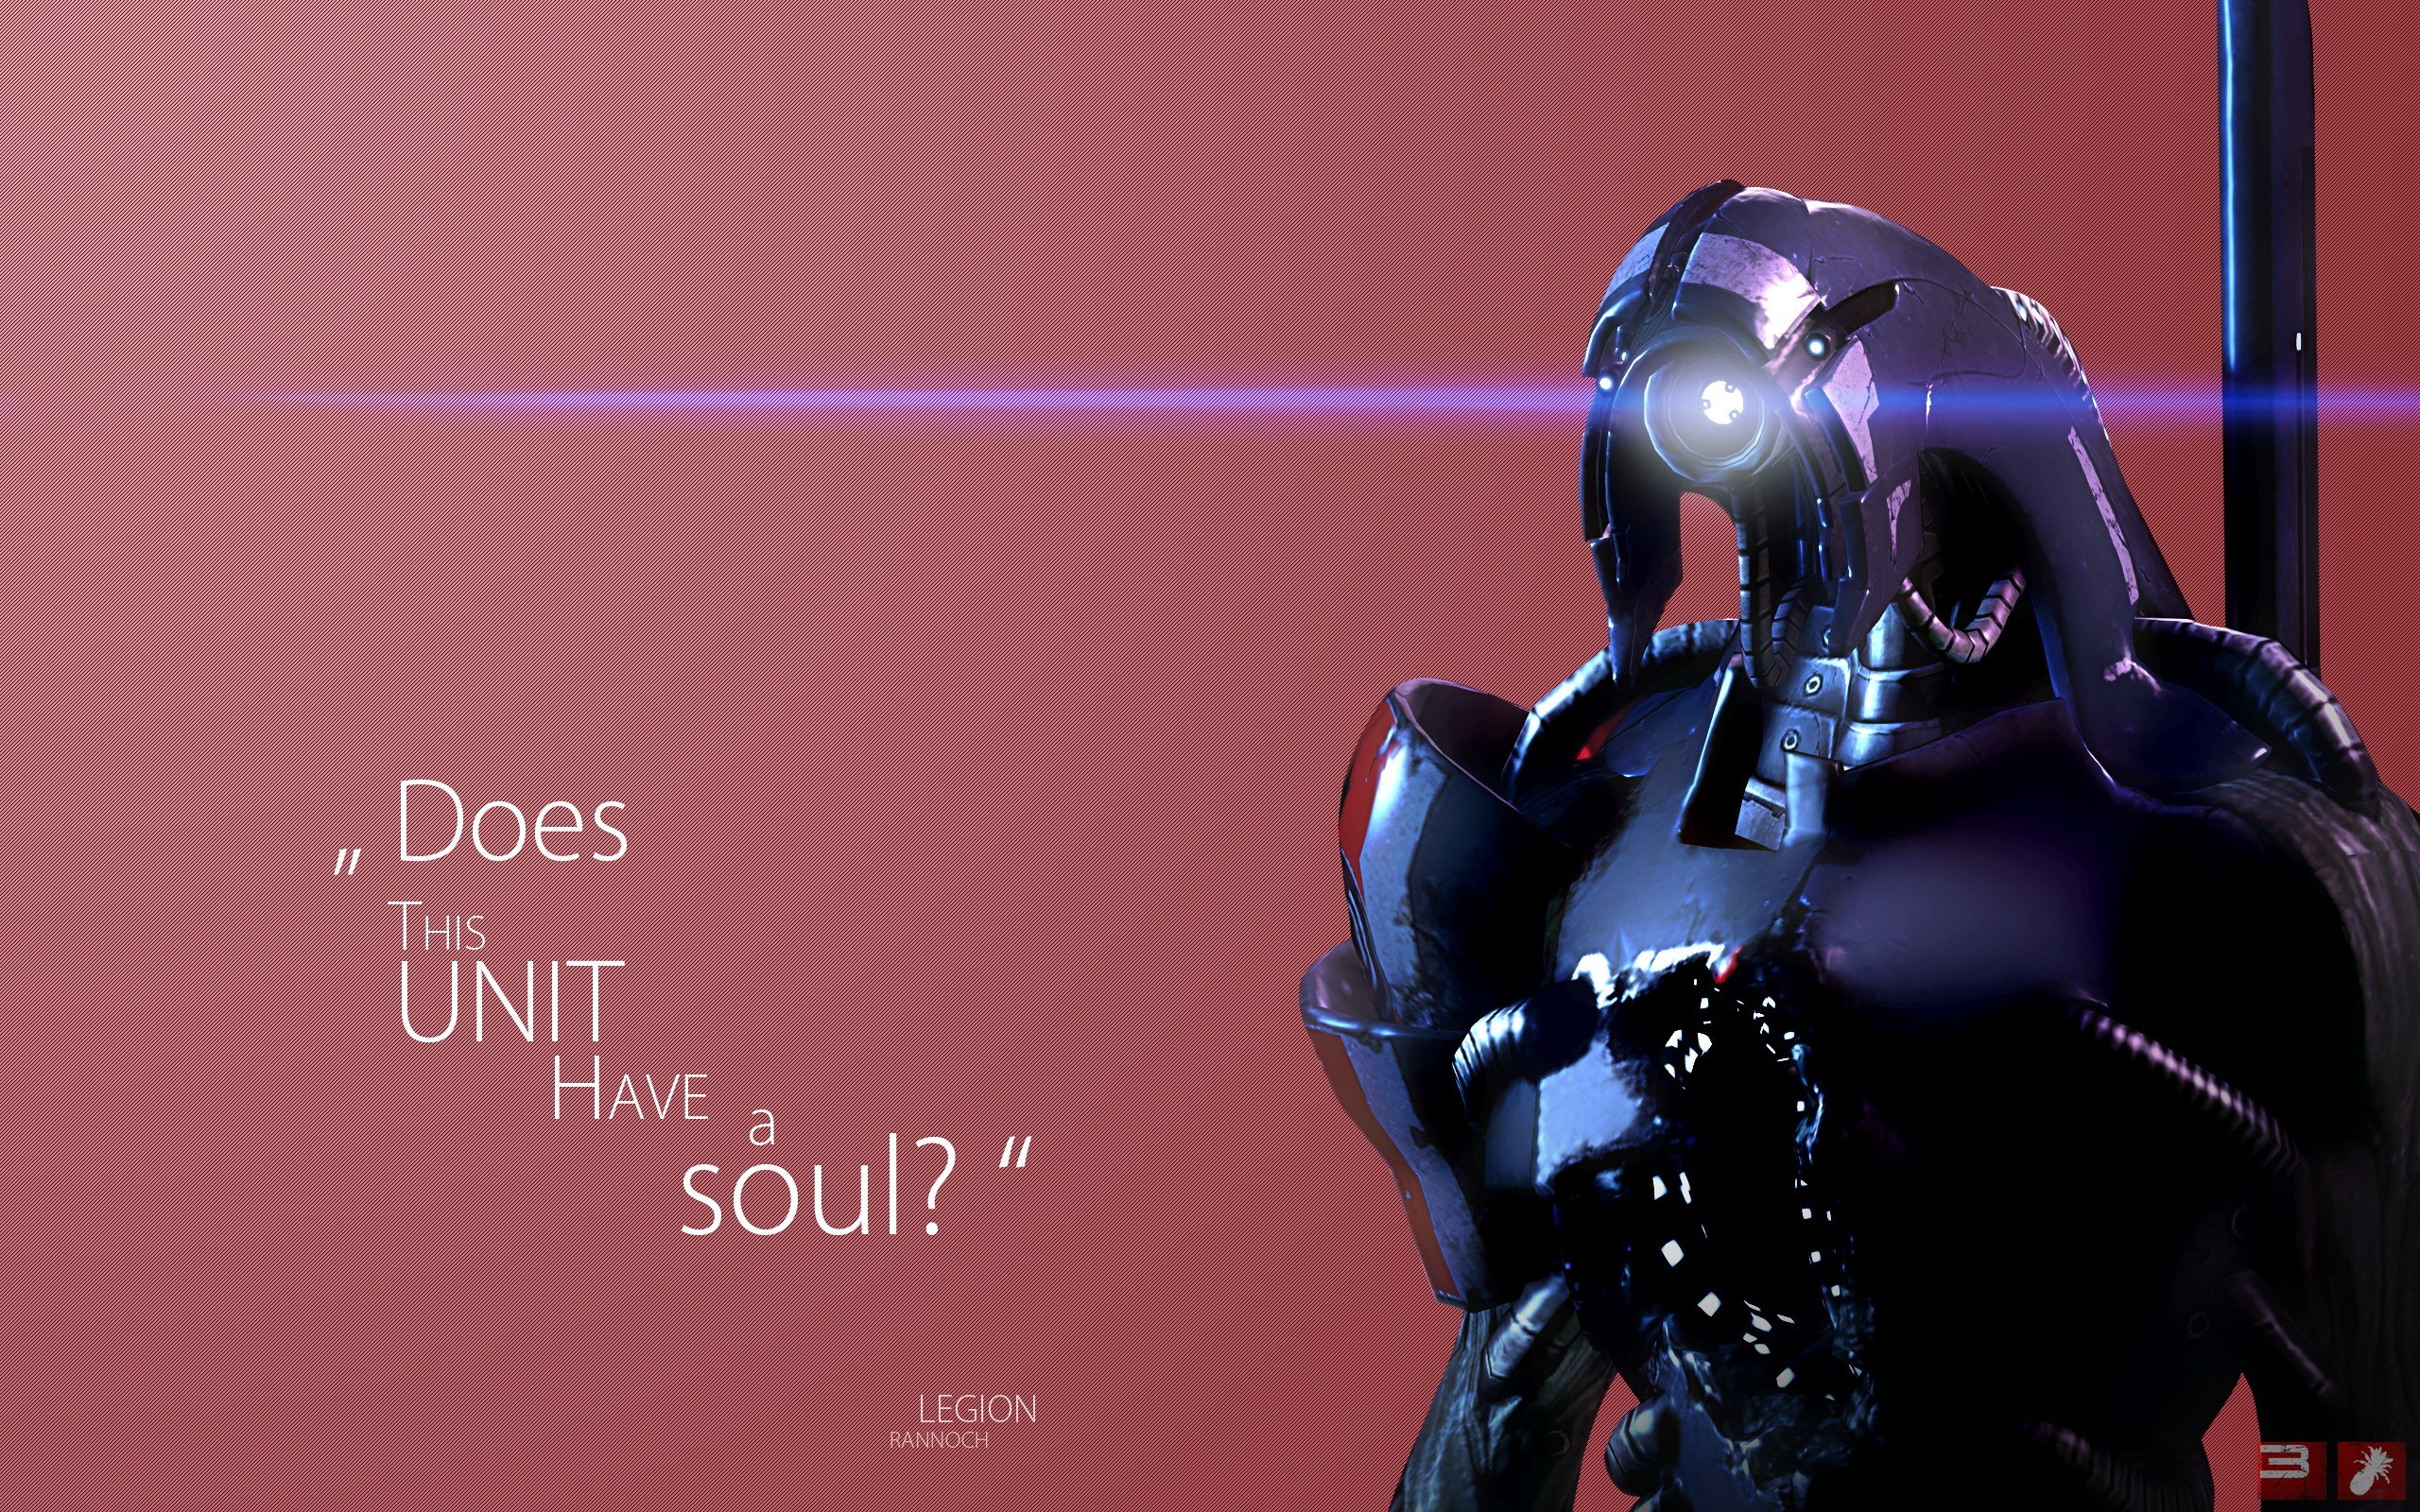 General 2560x1600 Mass Effect geth video games quote simple background fan art science fiction